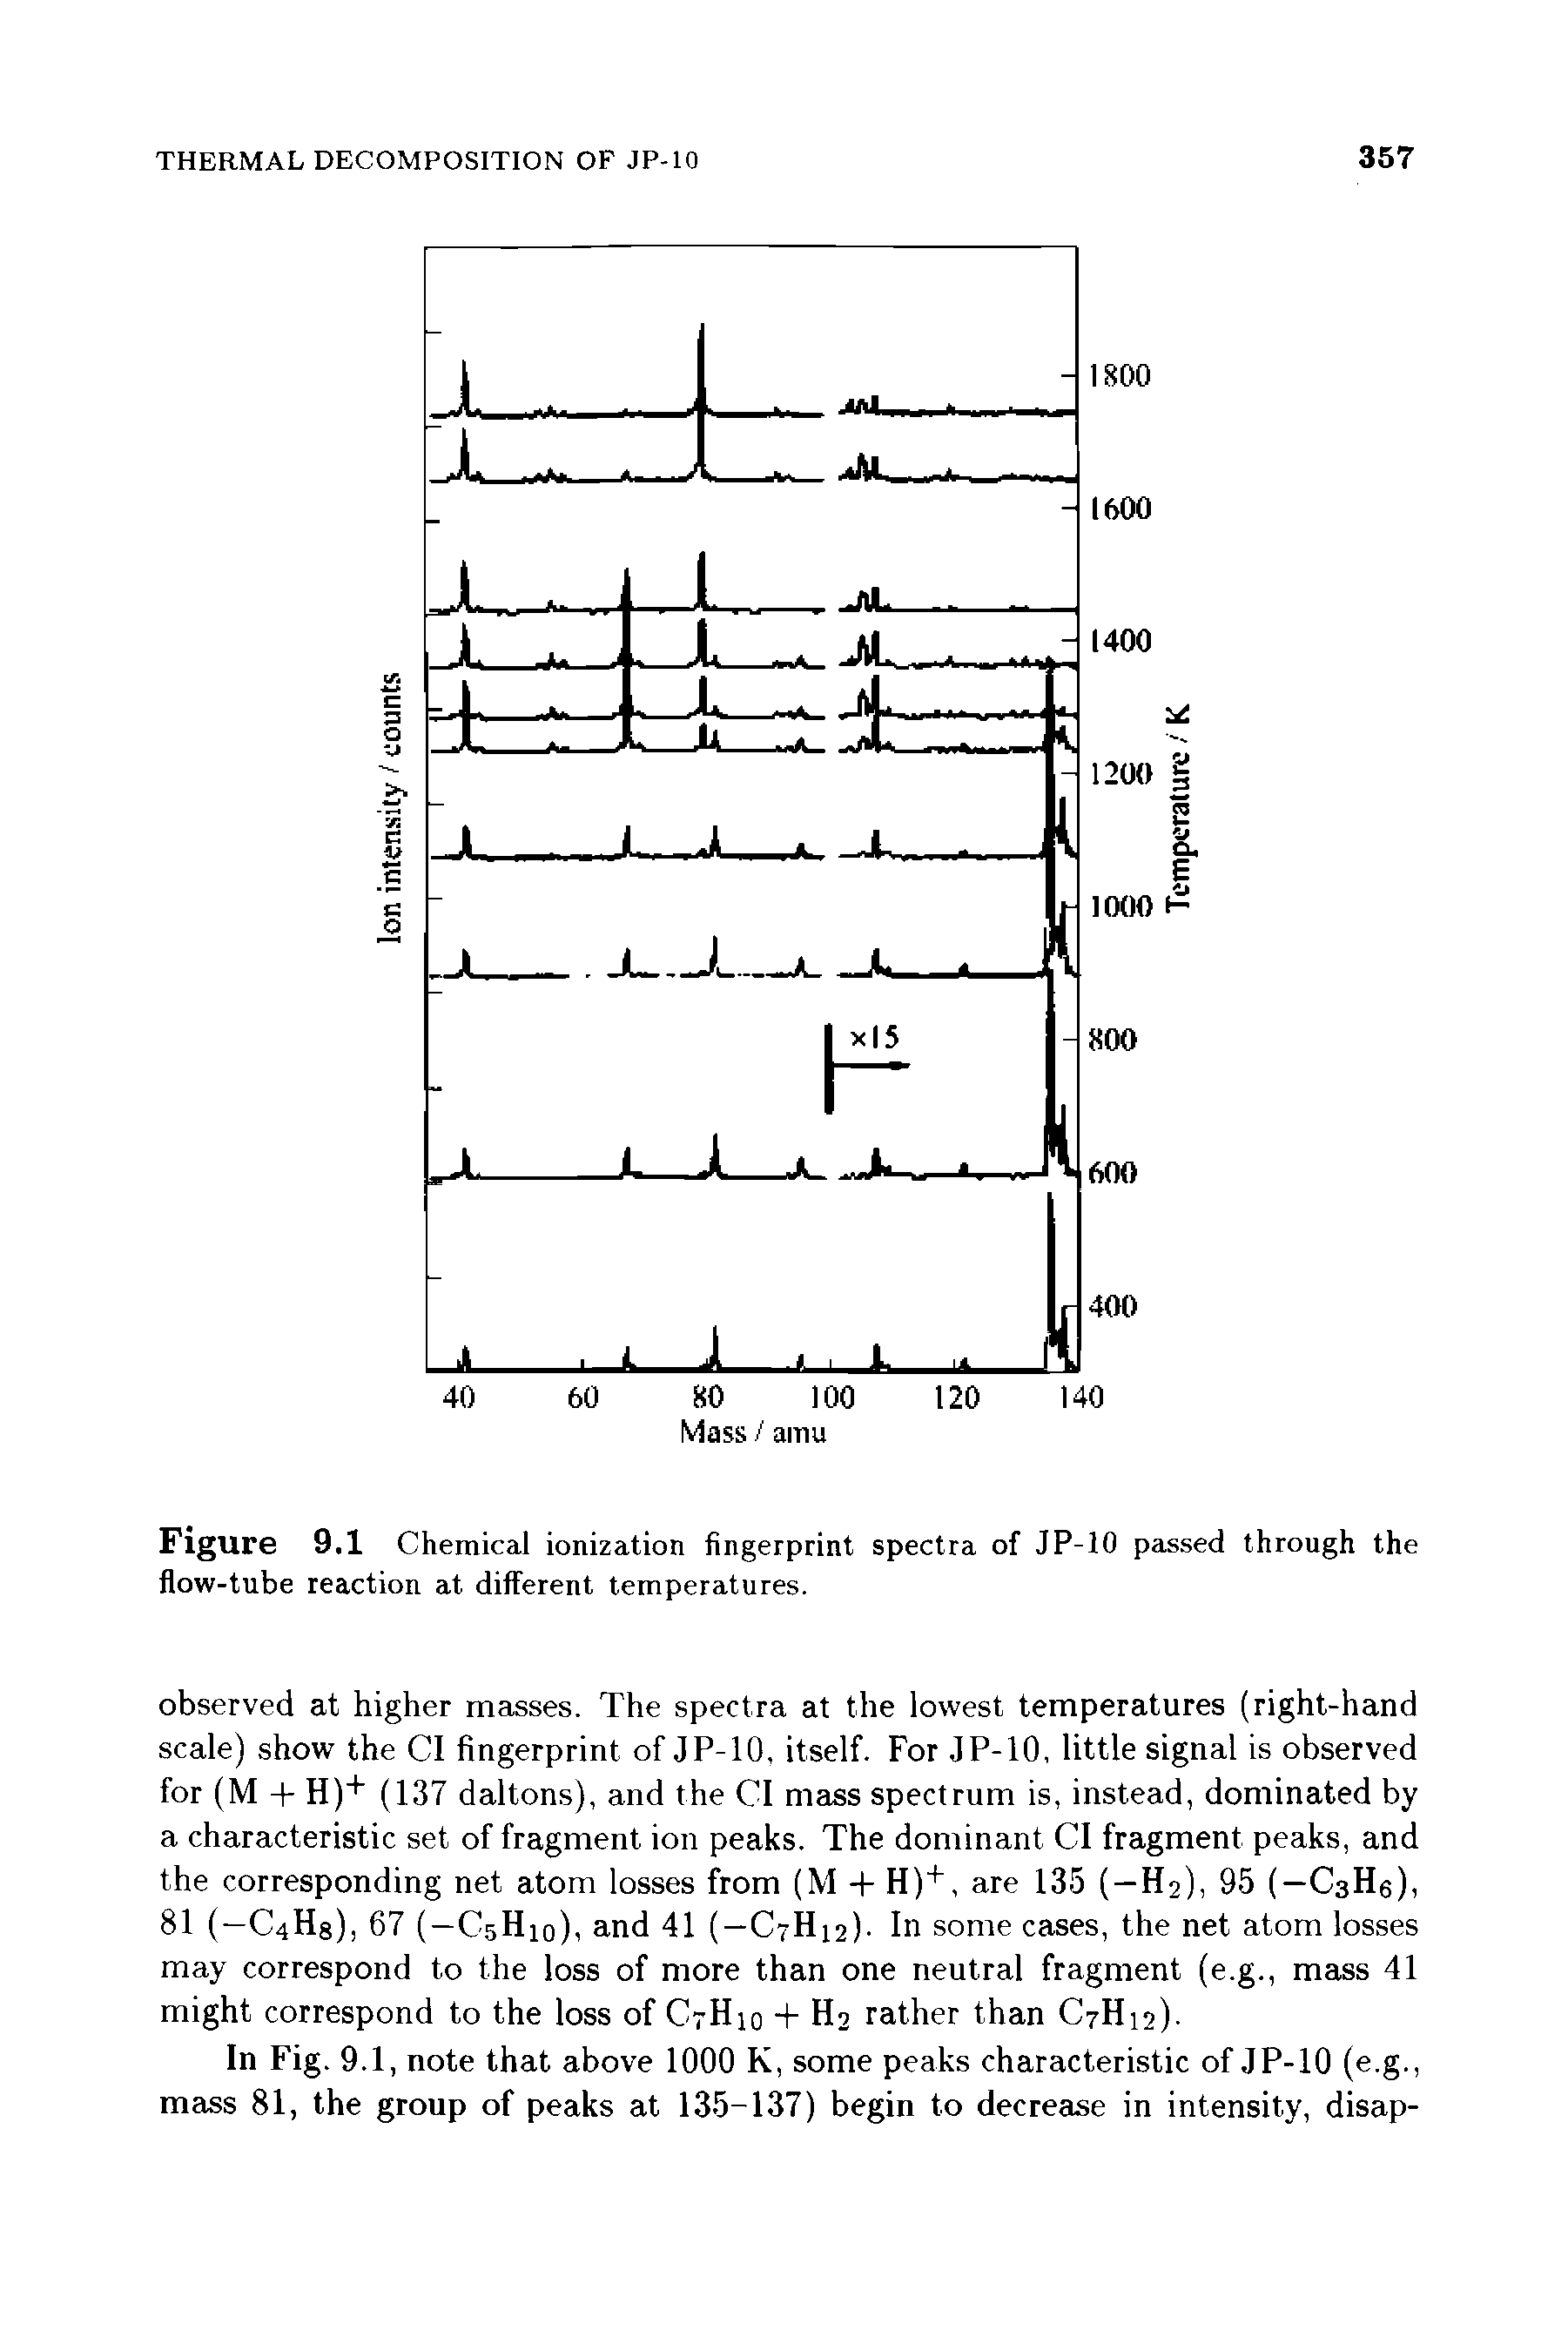 Figure 9.1 Chemical ionization fingerprint spectra of JP-10 passed through the flow-tube reaction at different temperatures.